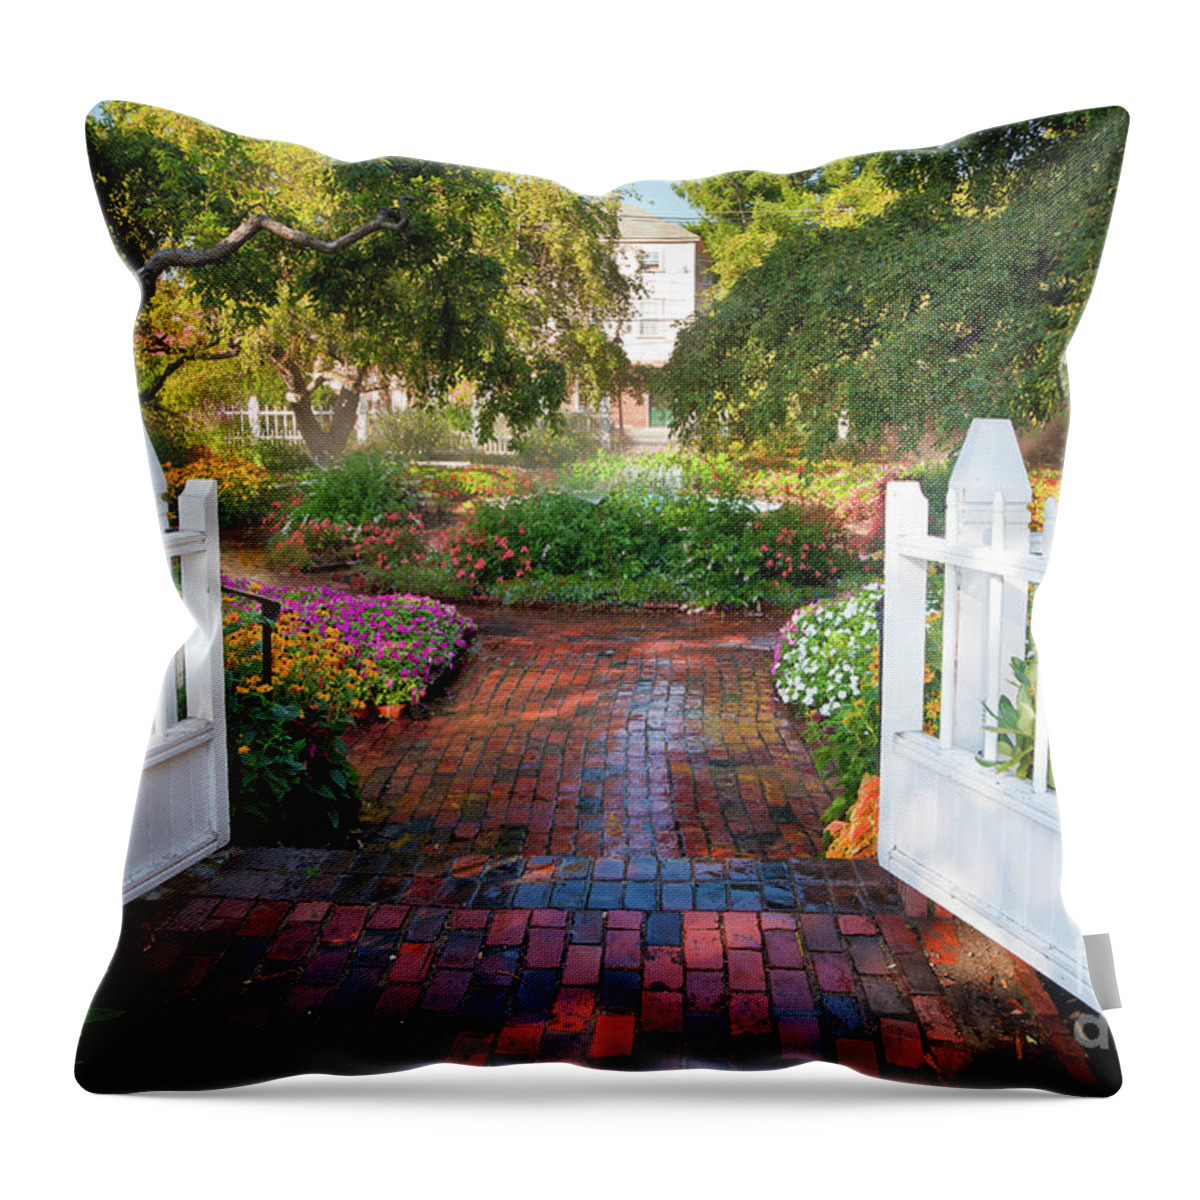 August Throw Pillow featuring the photograph Garden Gate by Susan Cole Kelly